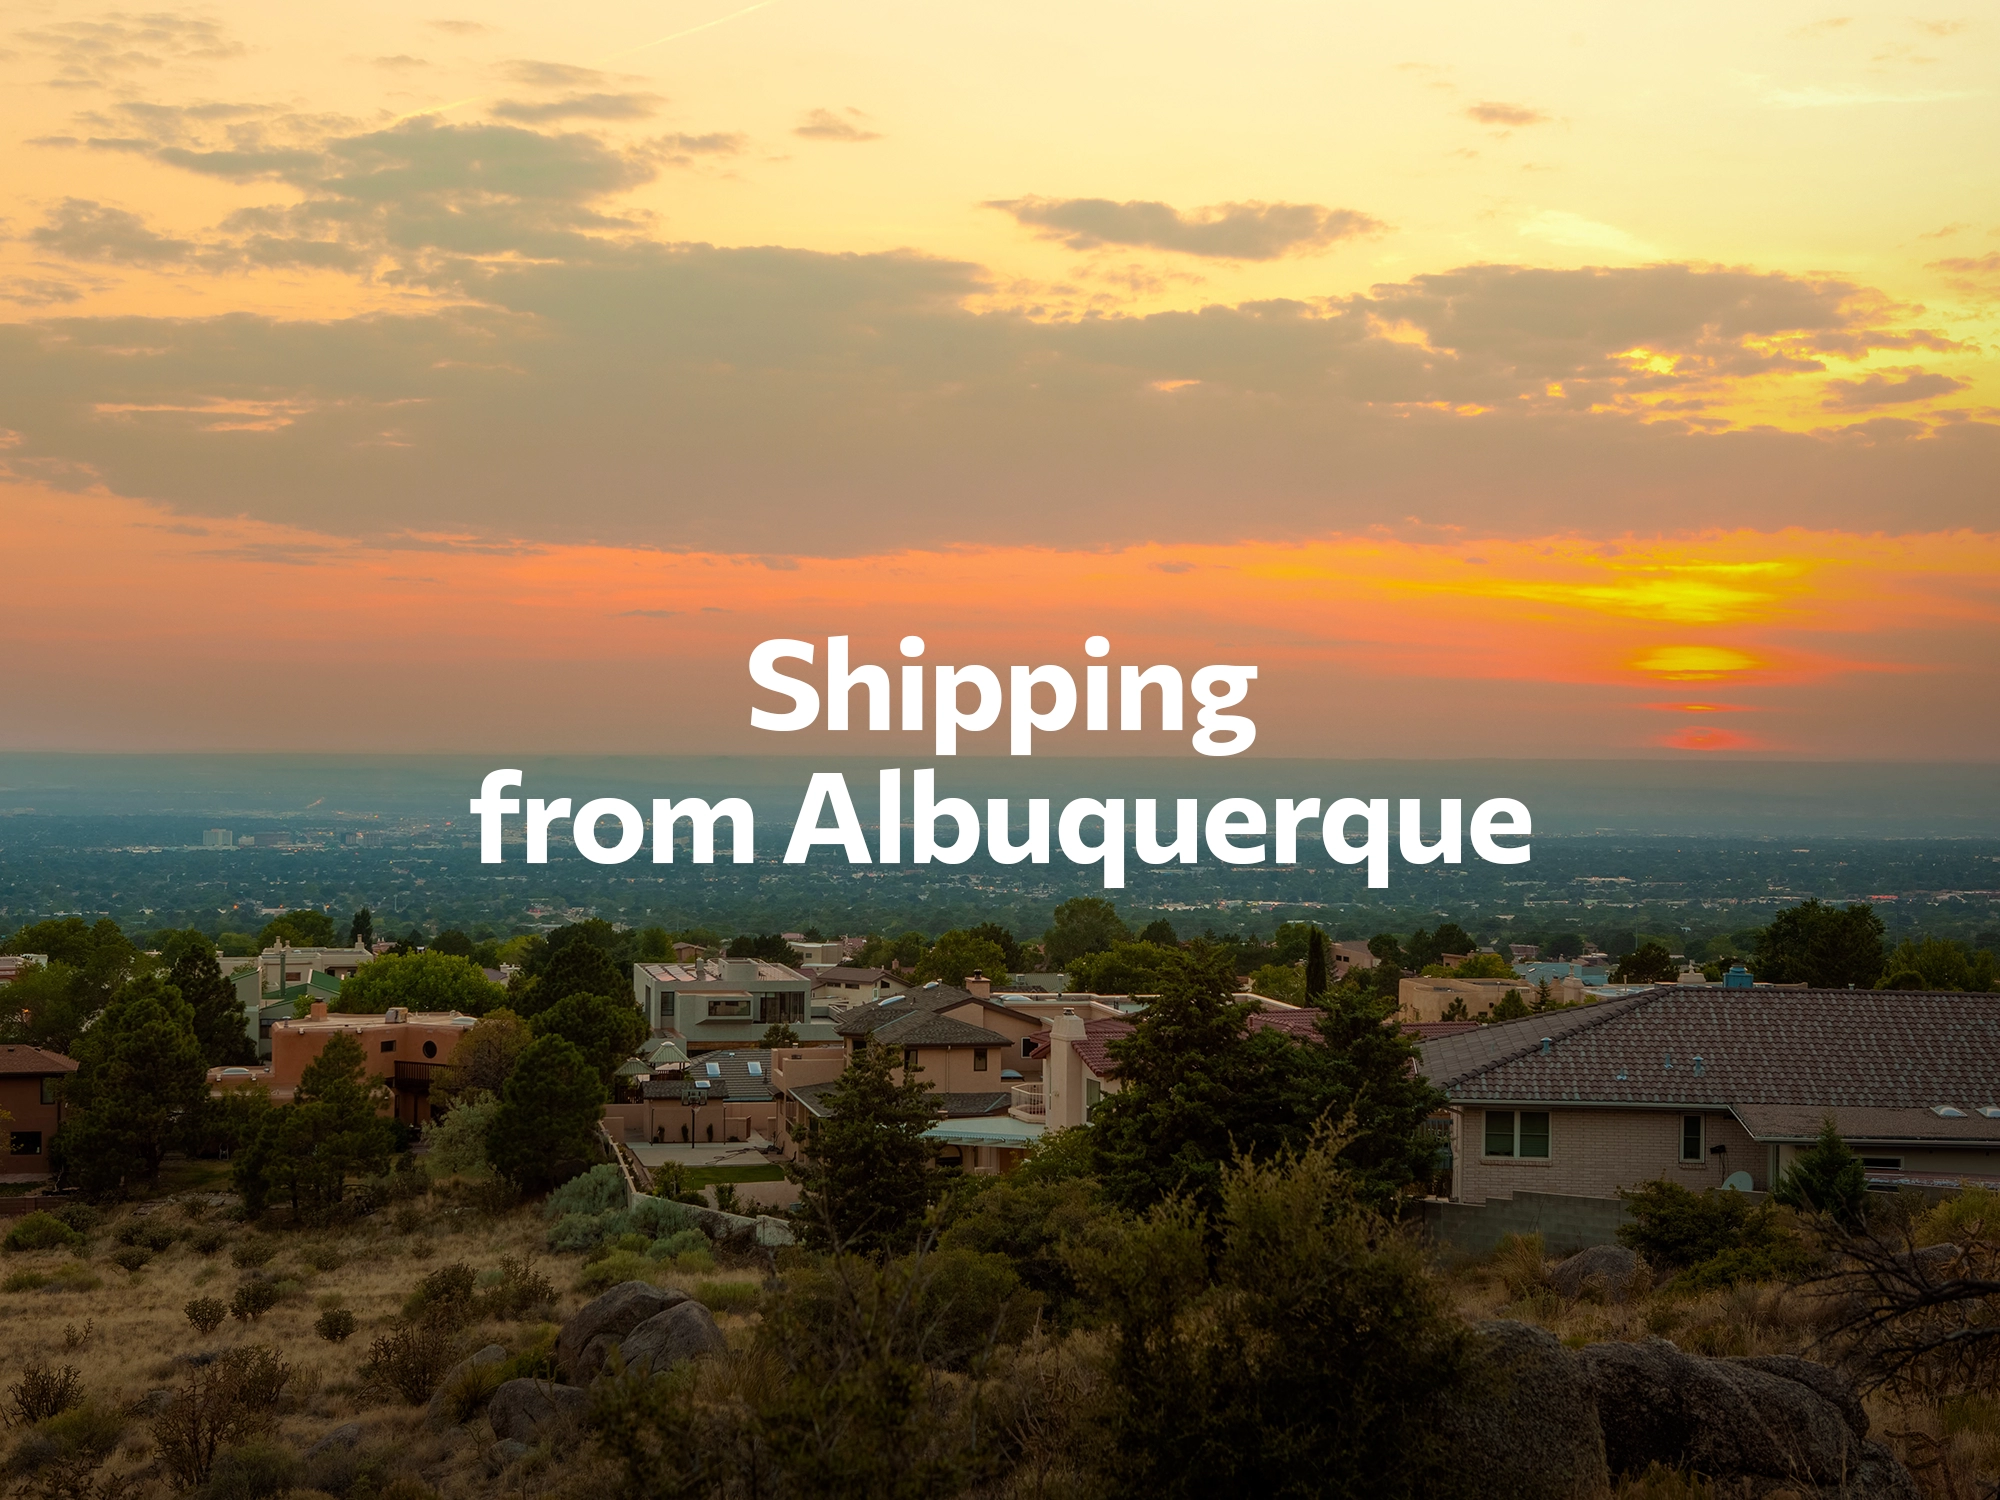 Shipping company from Albuquerque, freight rates for FTL and LTL shipping in Albuquerque